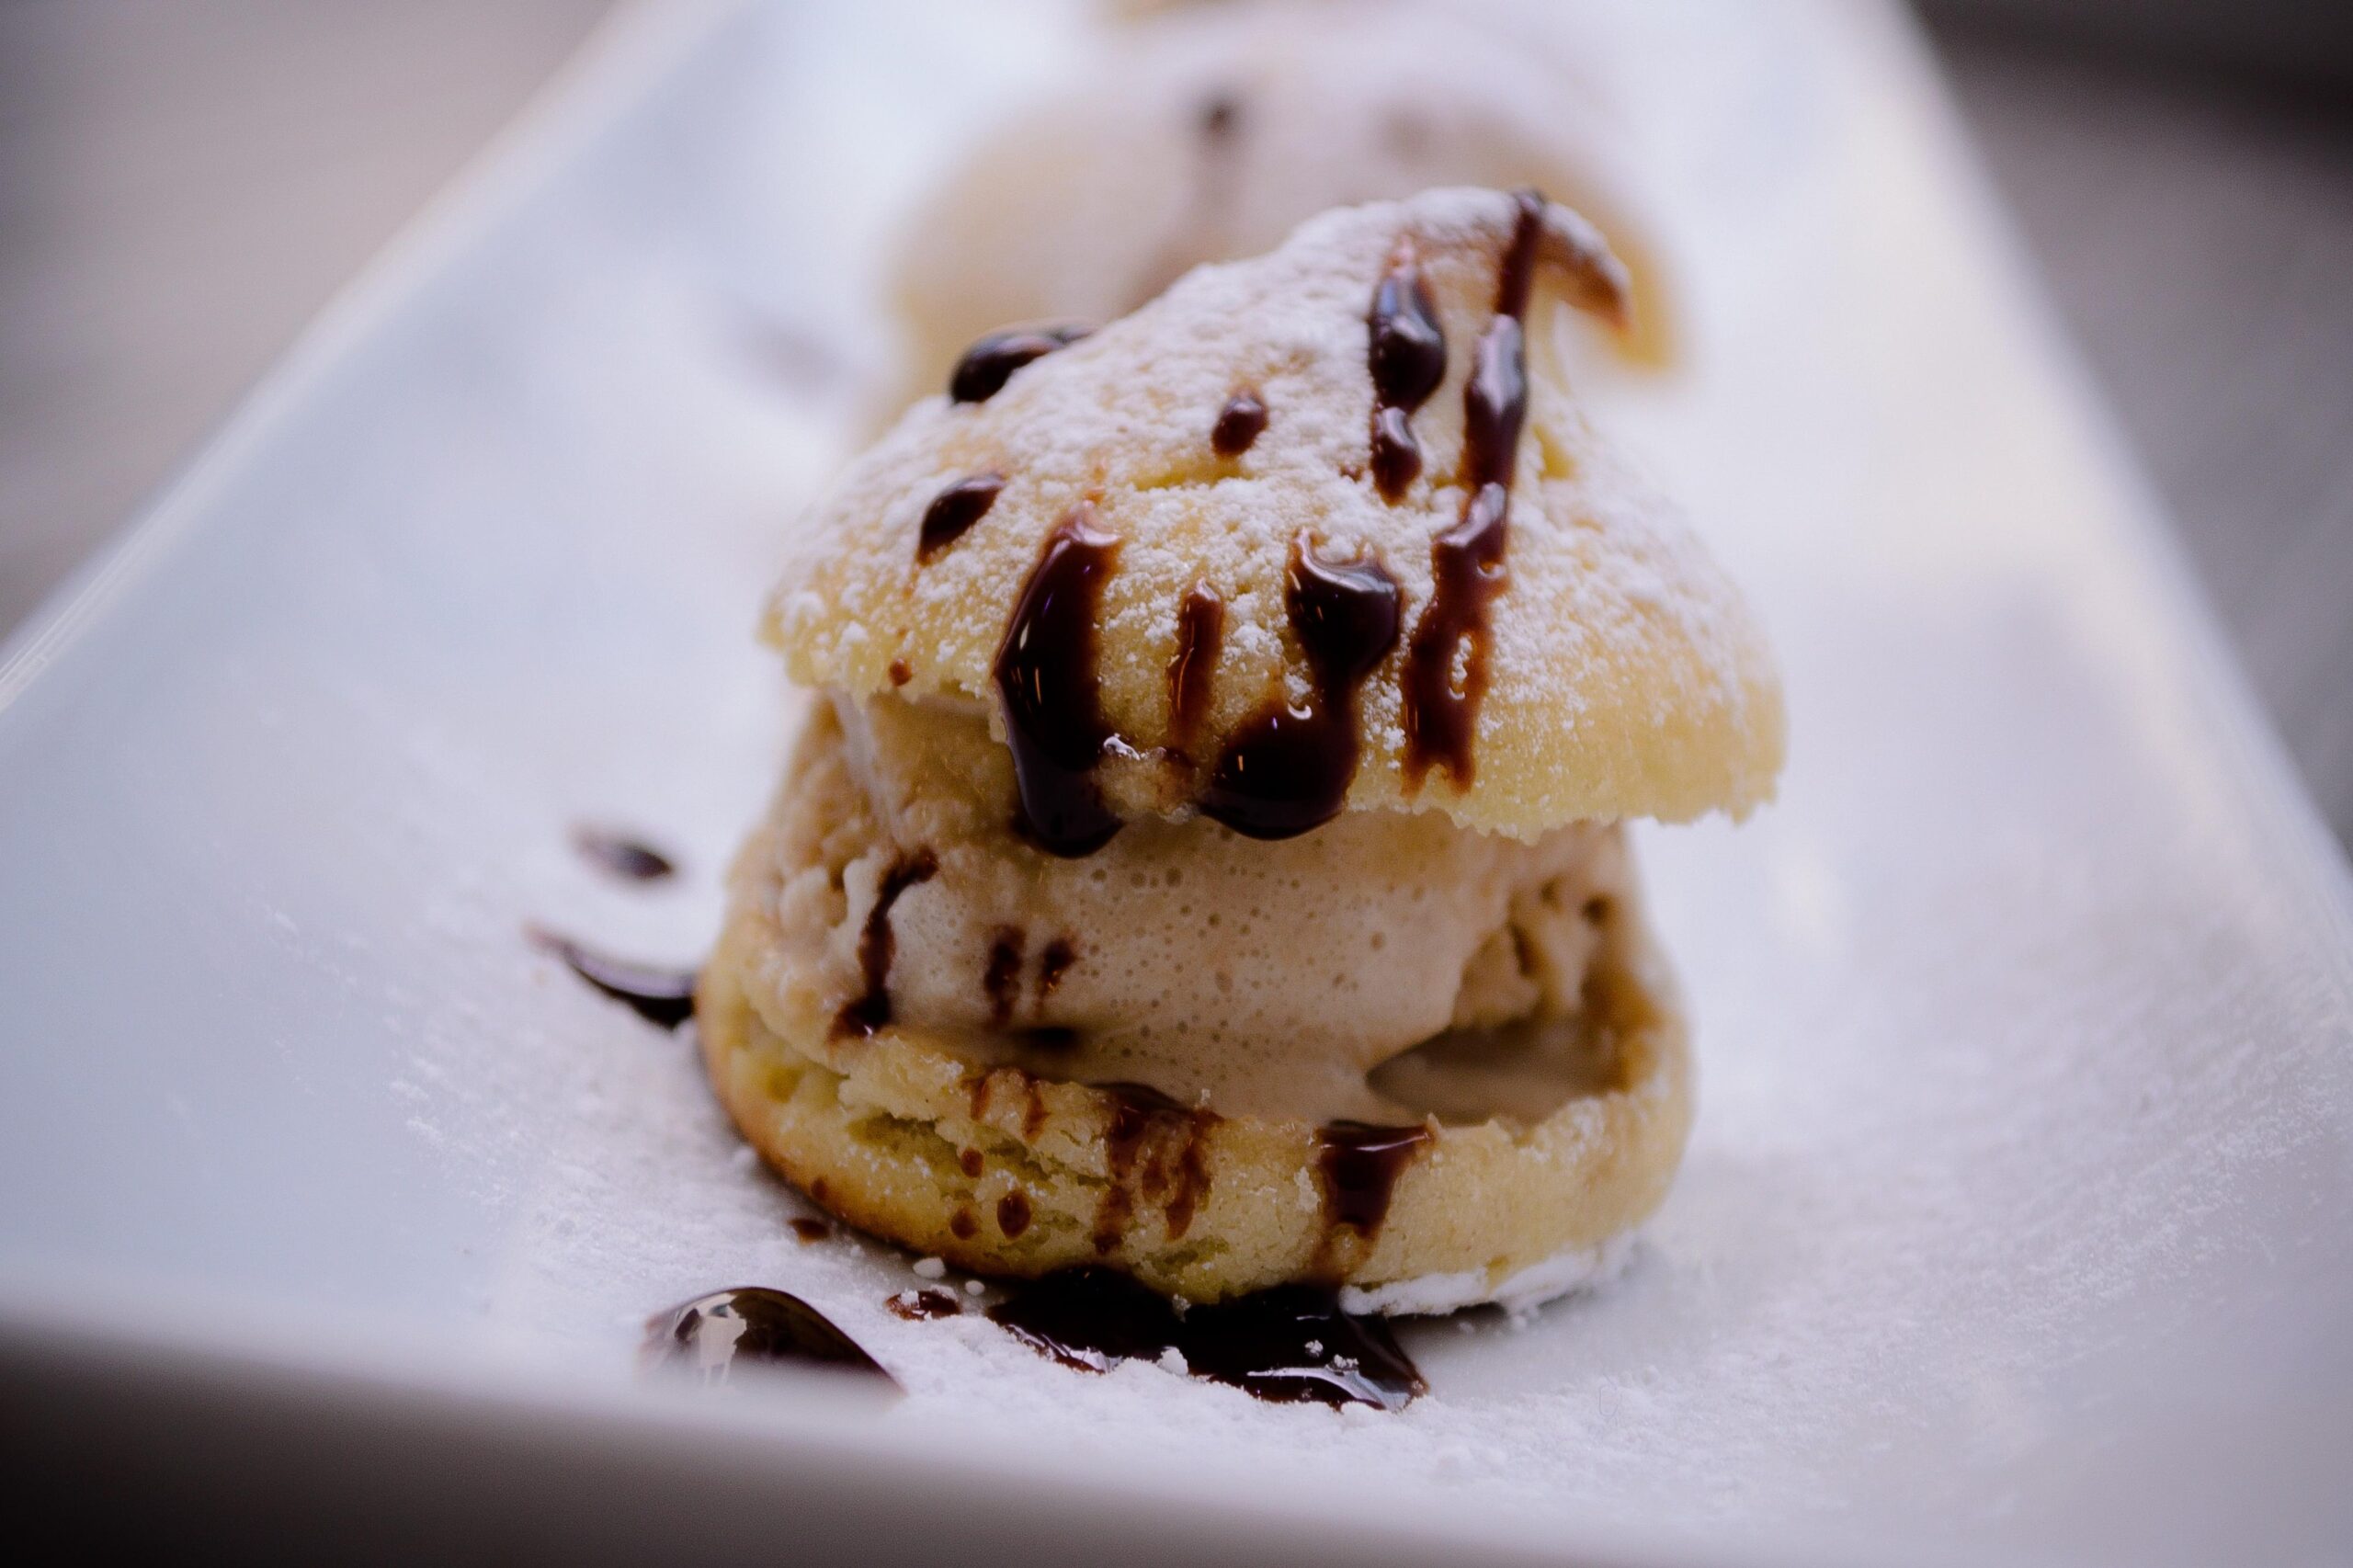  Elevate your dessert game with these homemade Profiteroles with Coffee Ice Cream.